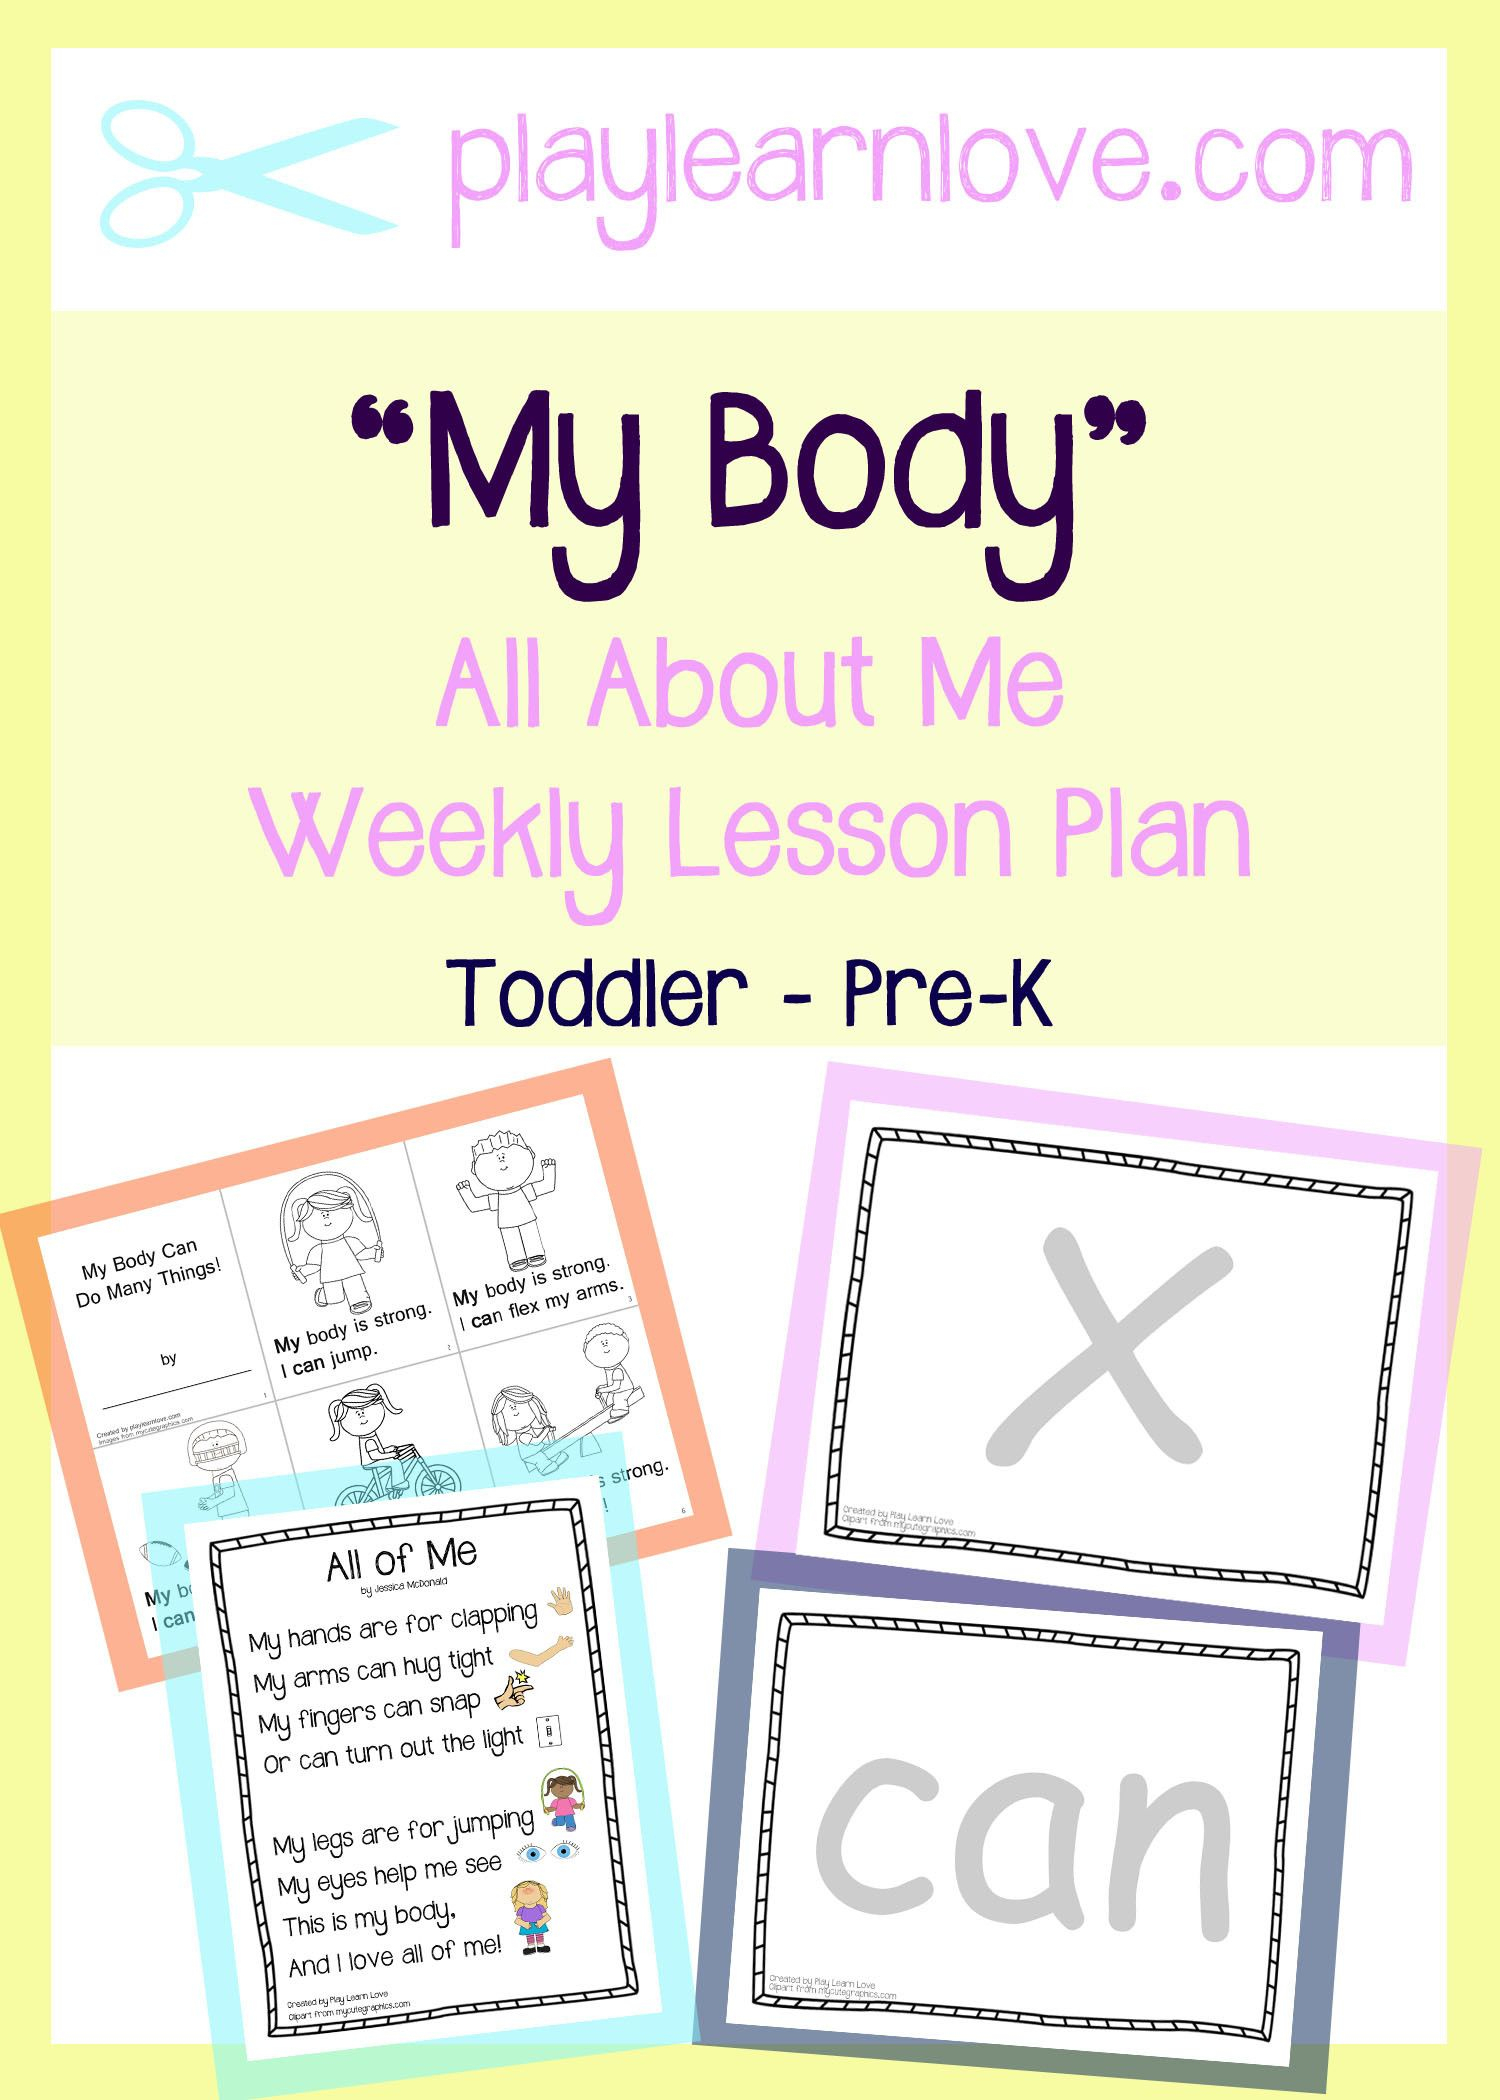 All About Me - My Body Lesson Plan - From Play Learn Love